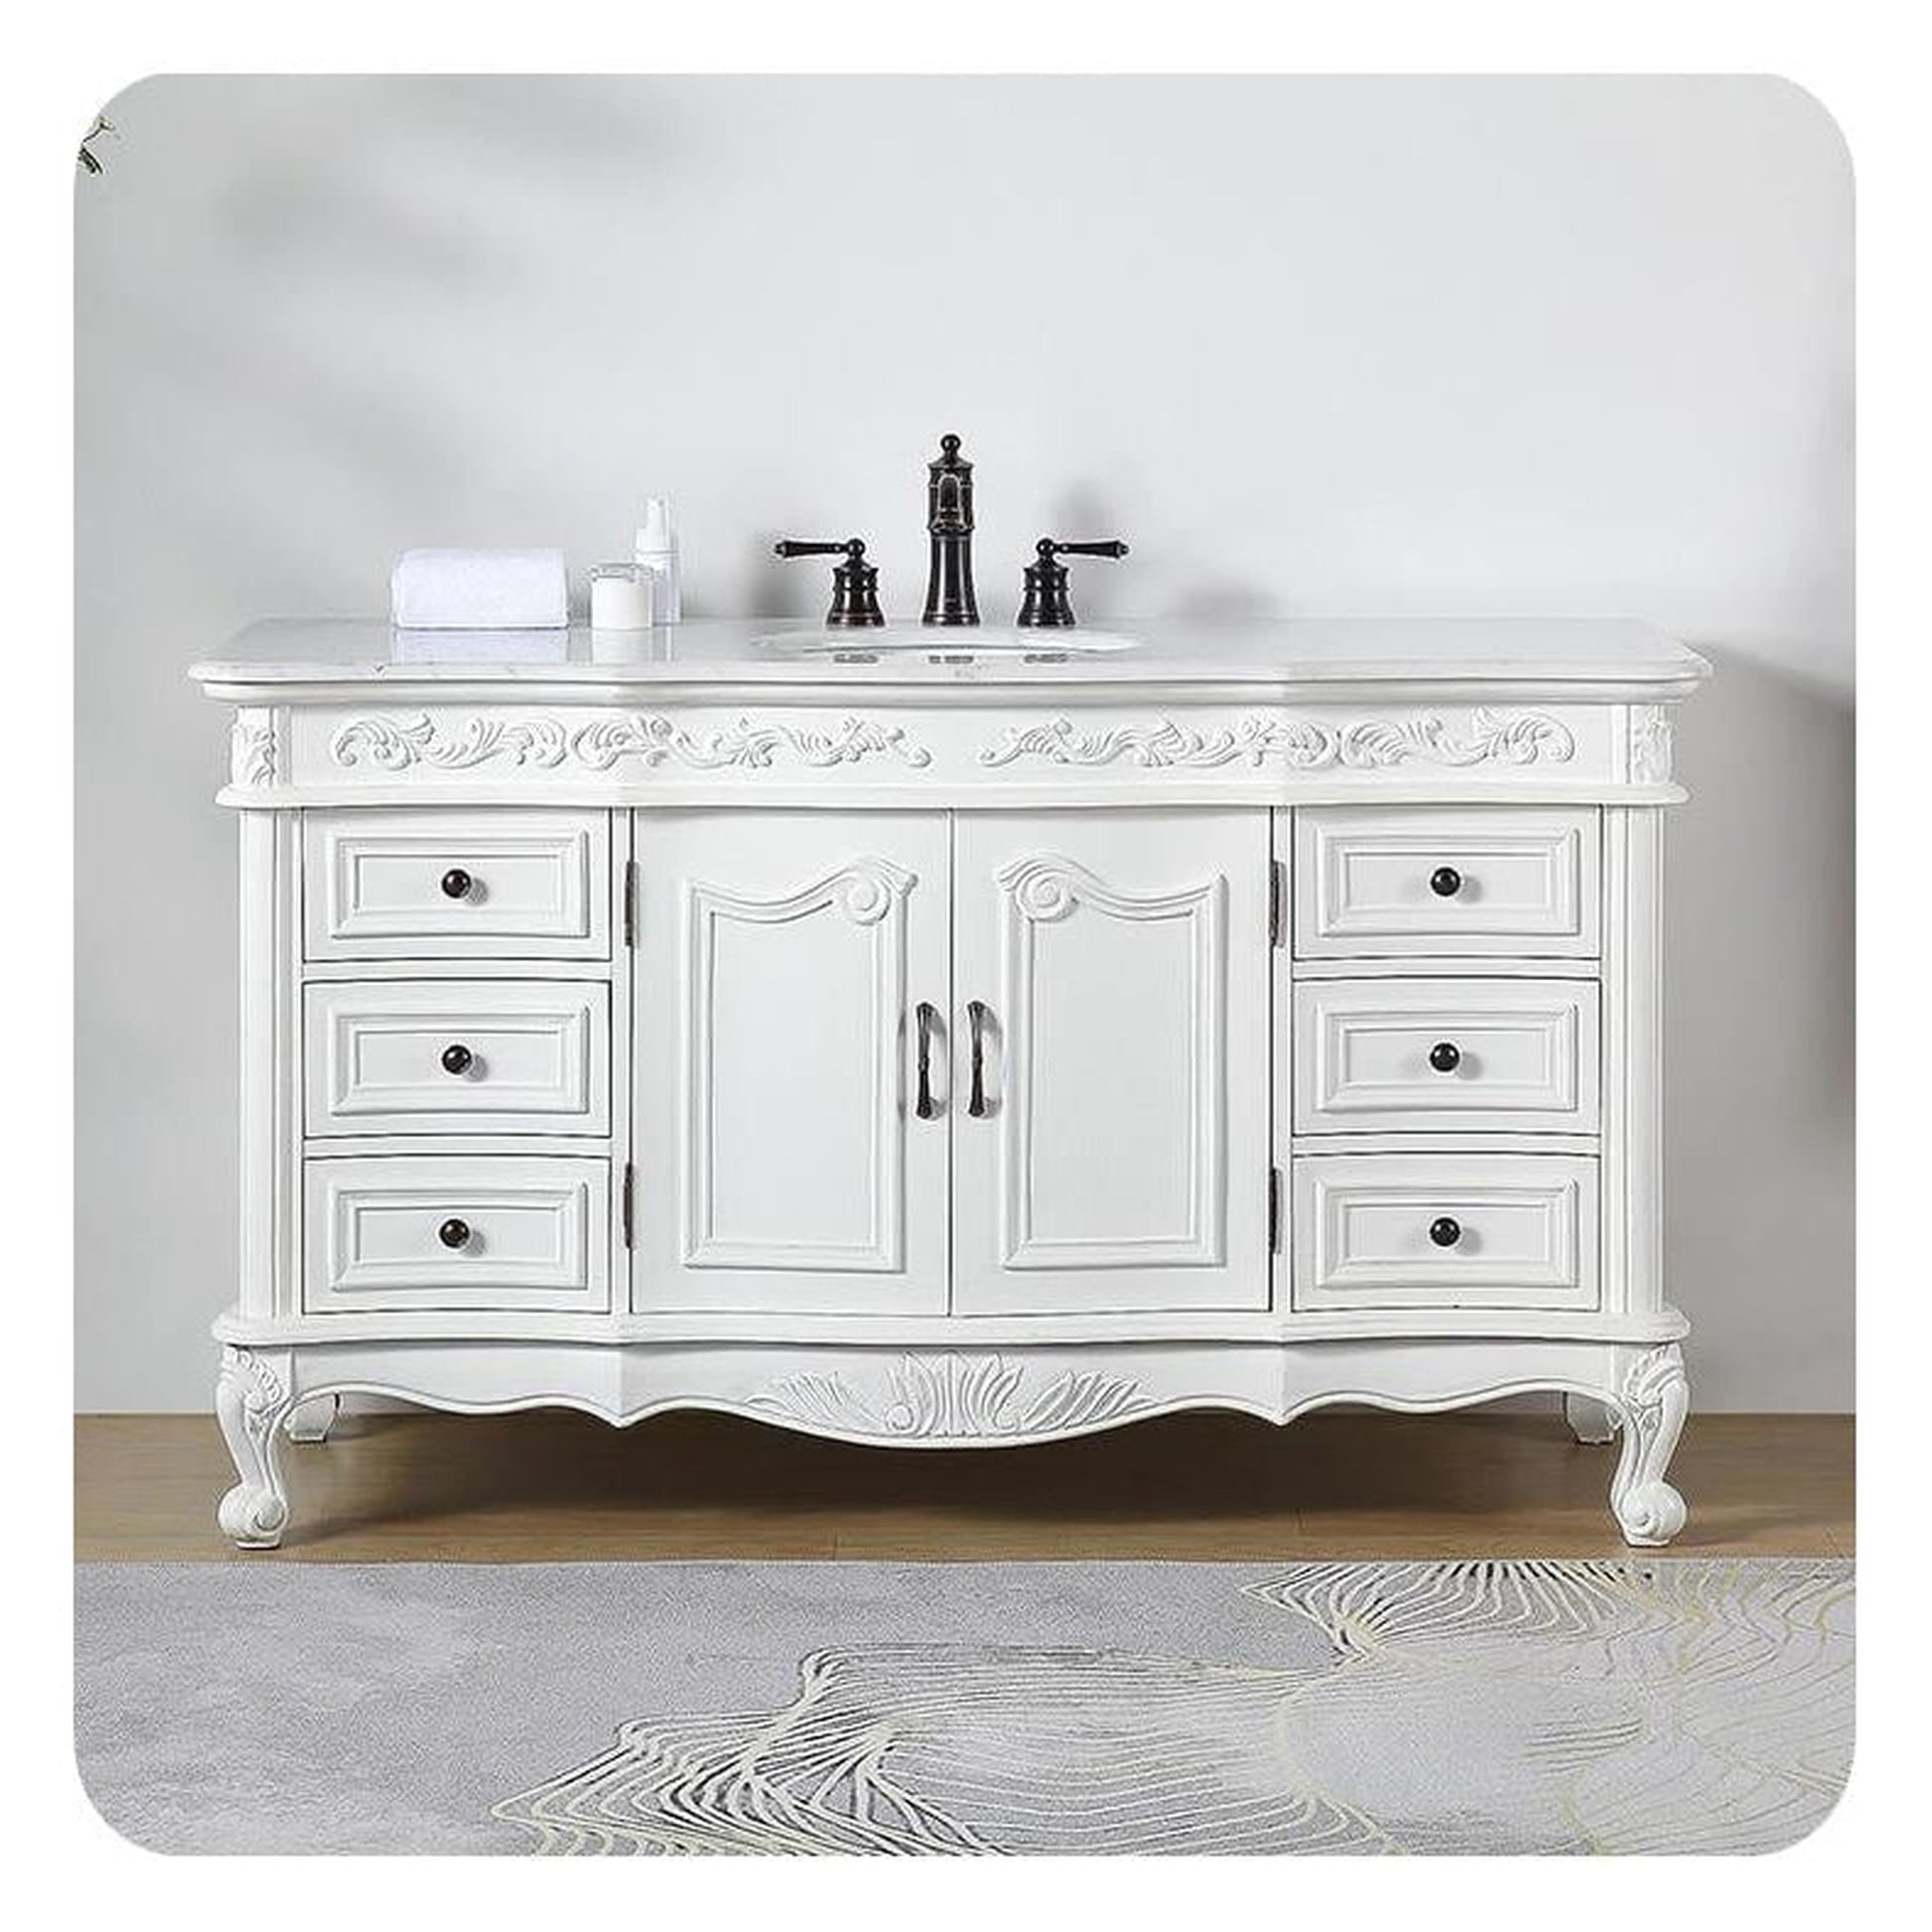 Silkroad Exclusive 60" Single Sink Antique White Bathroom Vanity With Carrara White Marble Countertop and White Ceramic Undermount Sink